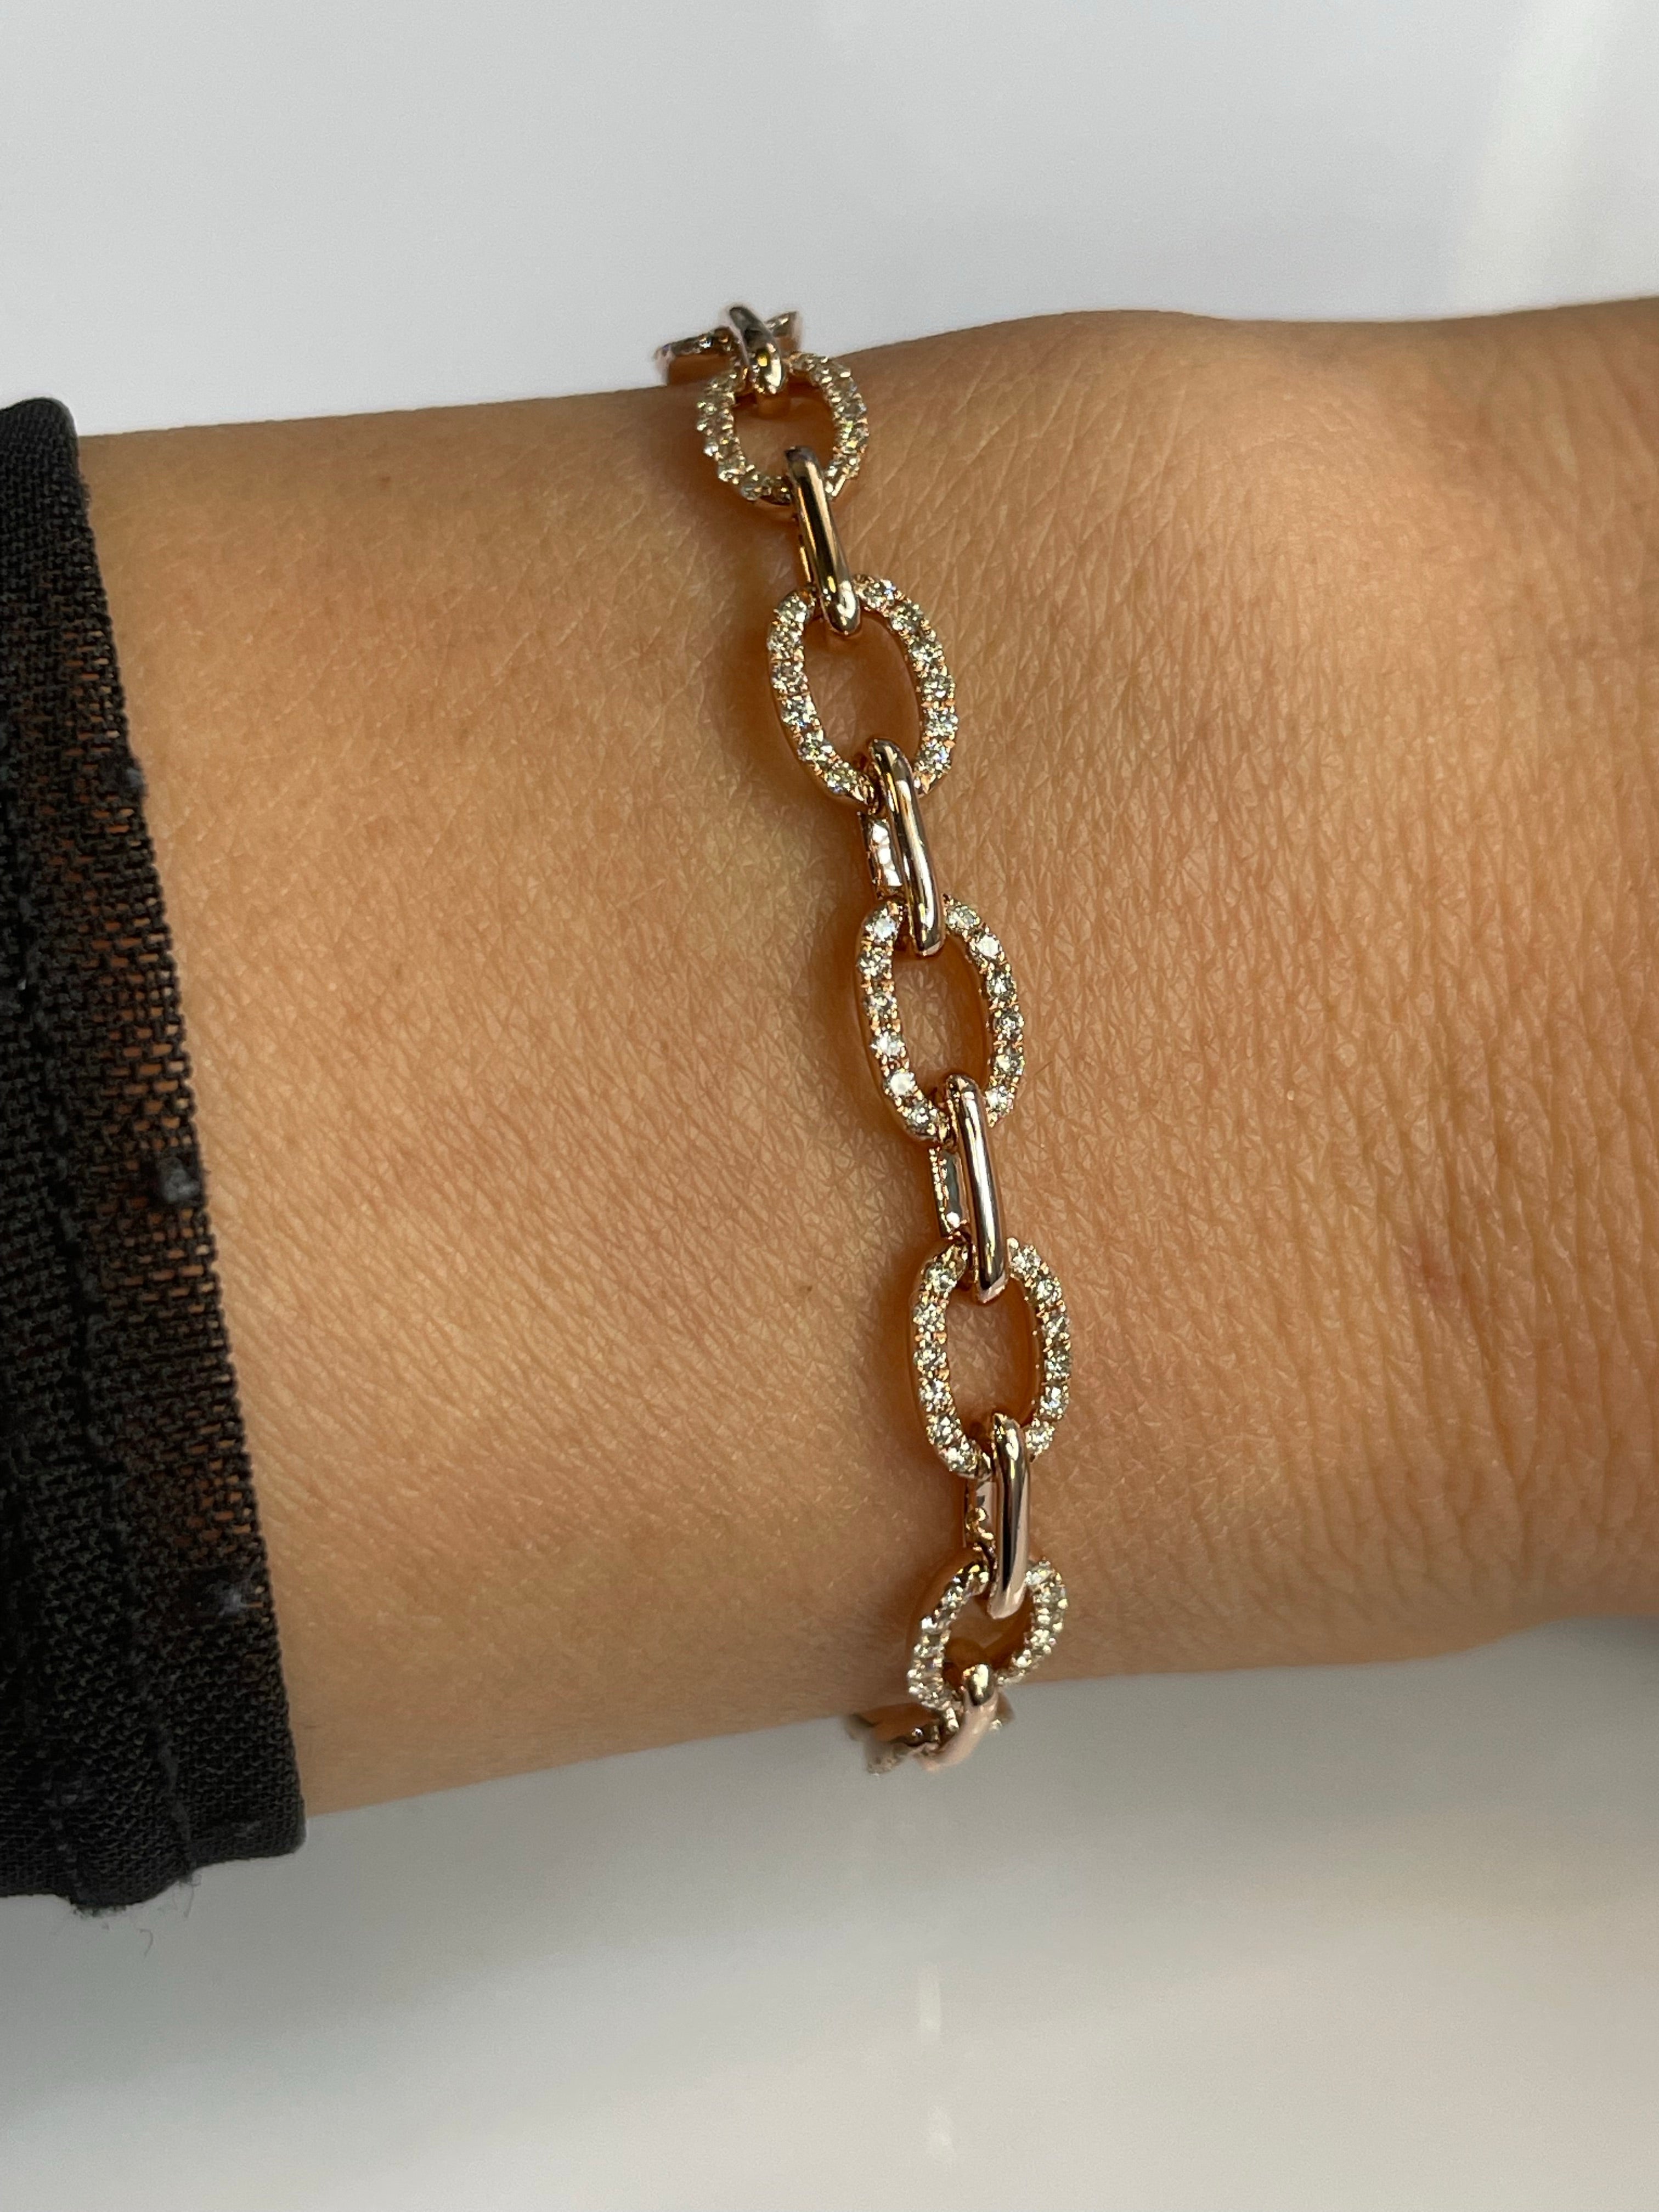 PAHAL ROSE GOLD BRACELET FOR GIRLS AND WOMENS / GIFT FOR GIRLS AND WOMEN /  AMEICAN DIAMOND BRACELET